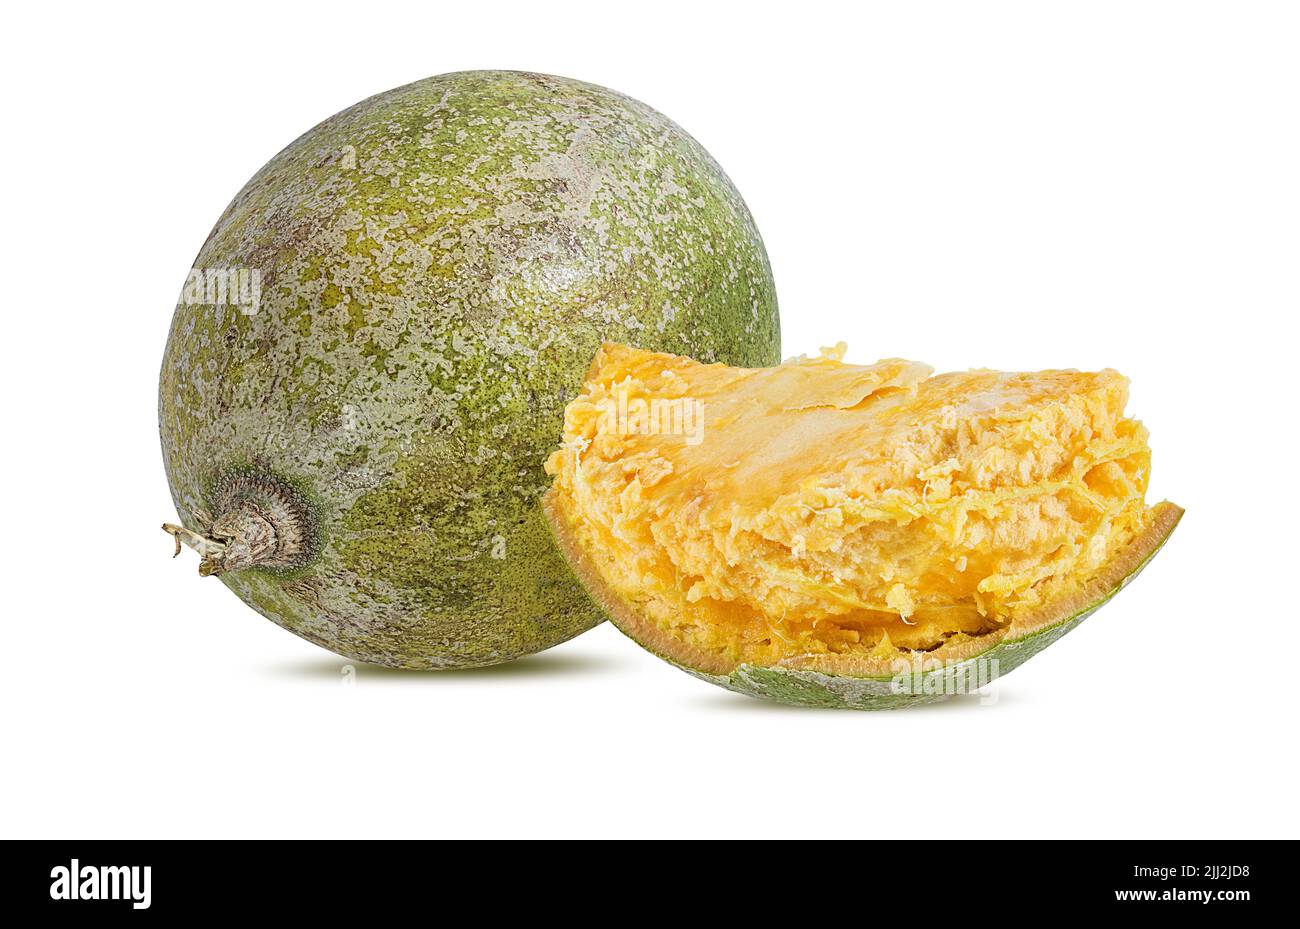 Aegle Marmelos bael fruits or wood apple fruit (bel patthar) on a white background Stock Photo